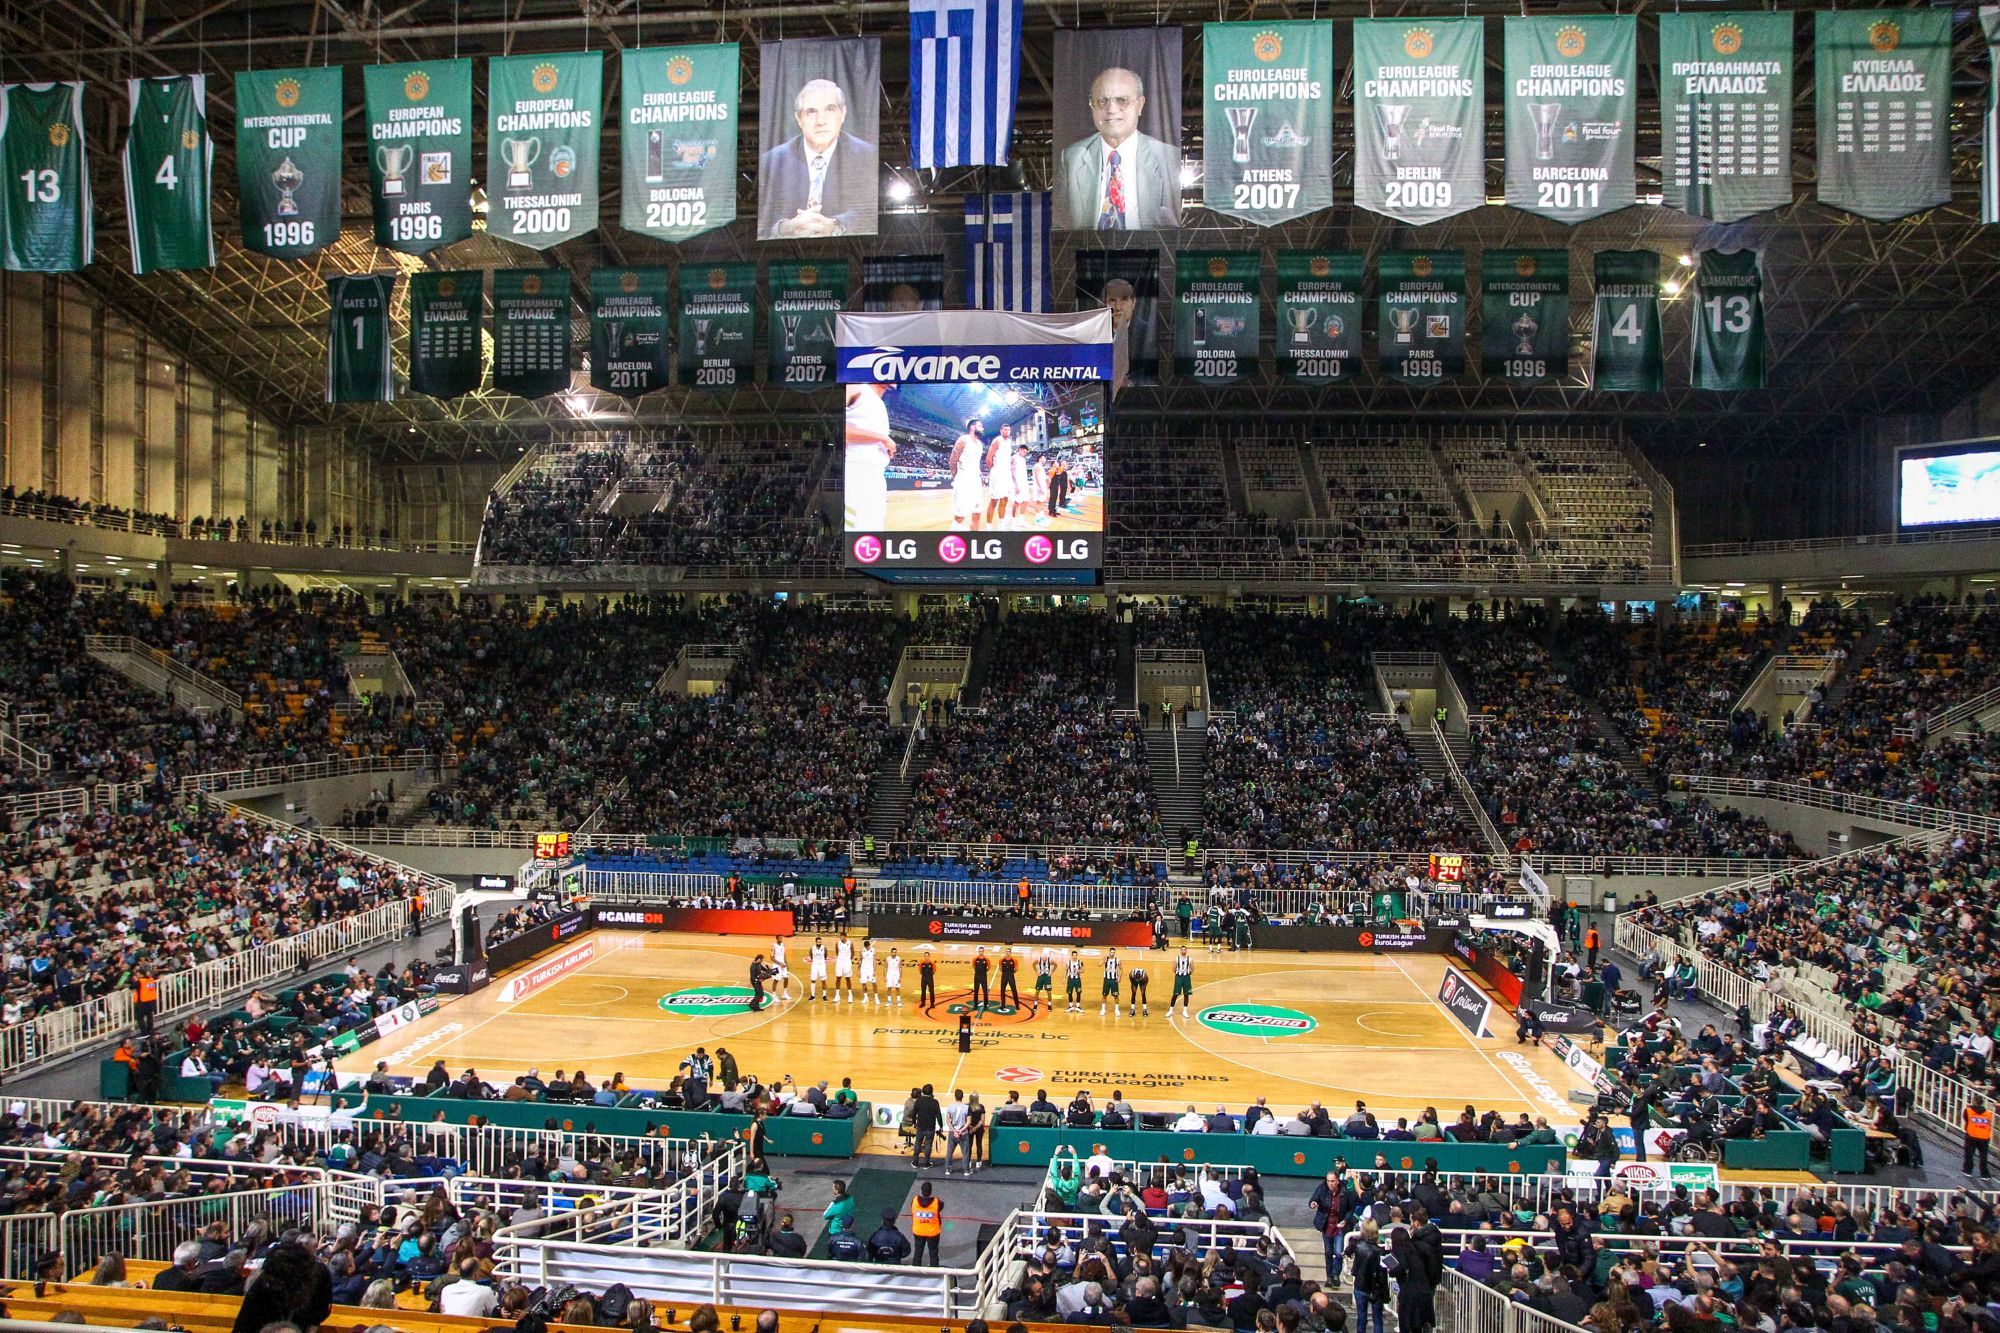 General View during the Euroleague match between Panathinaikos and Real Madrid on 26 December 2019
Photo : Eurokinissi / Icon Sport